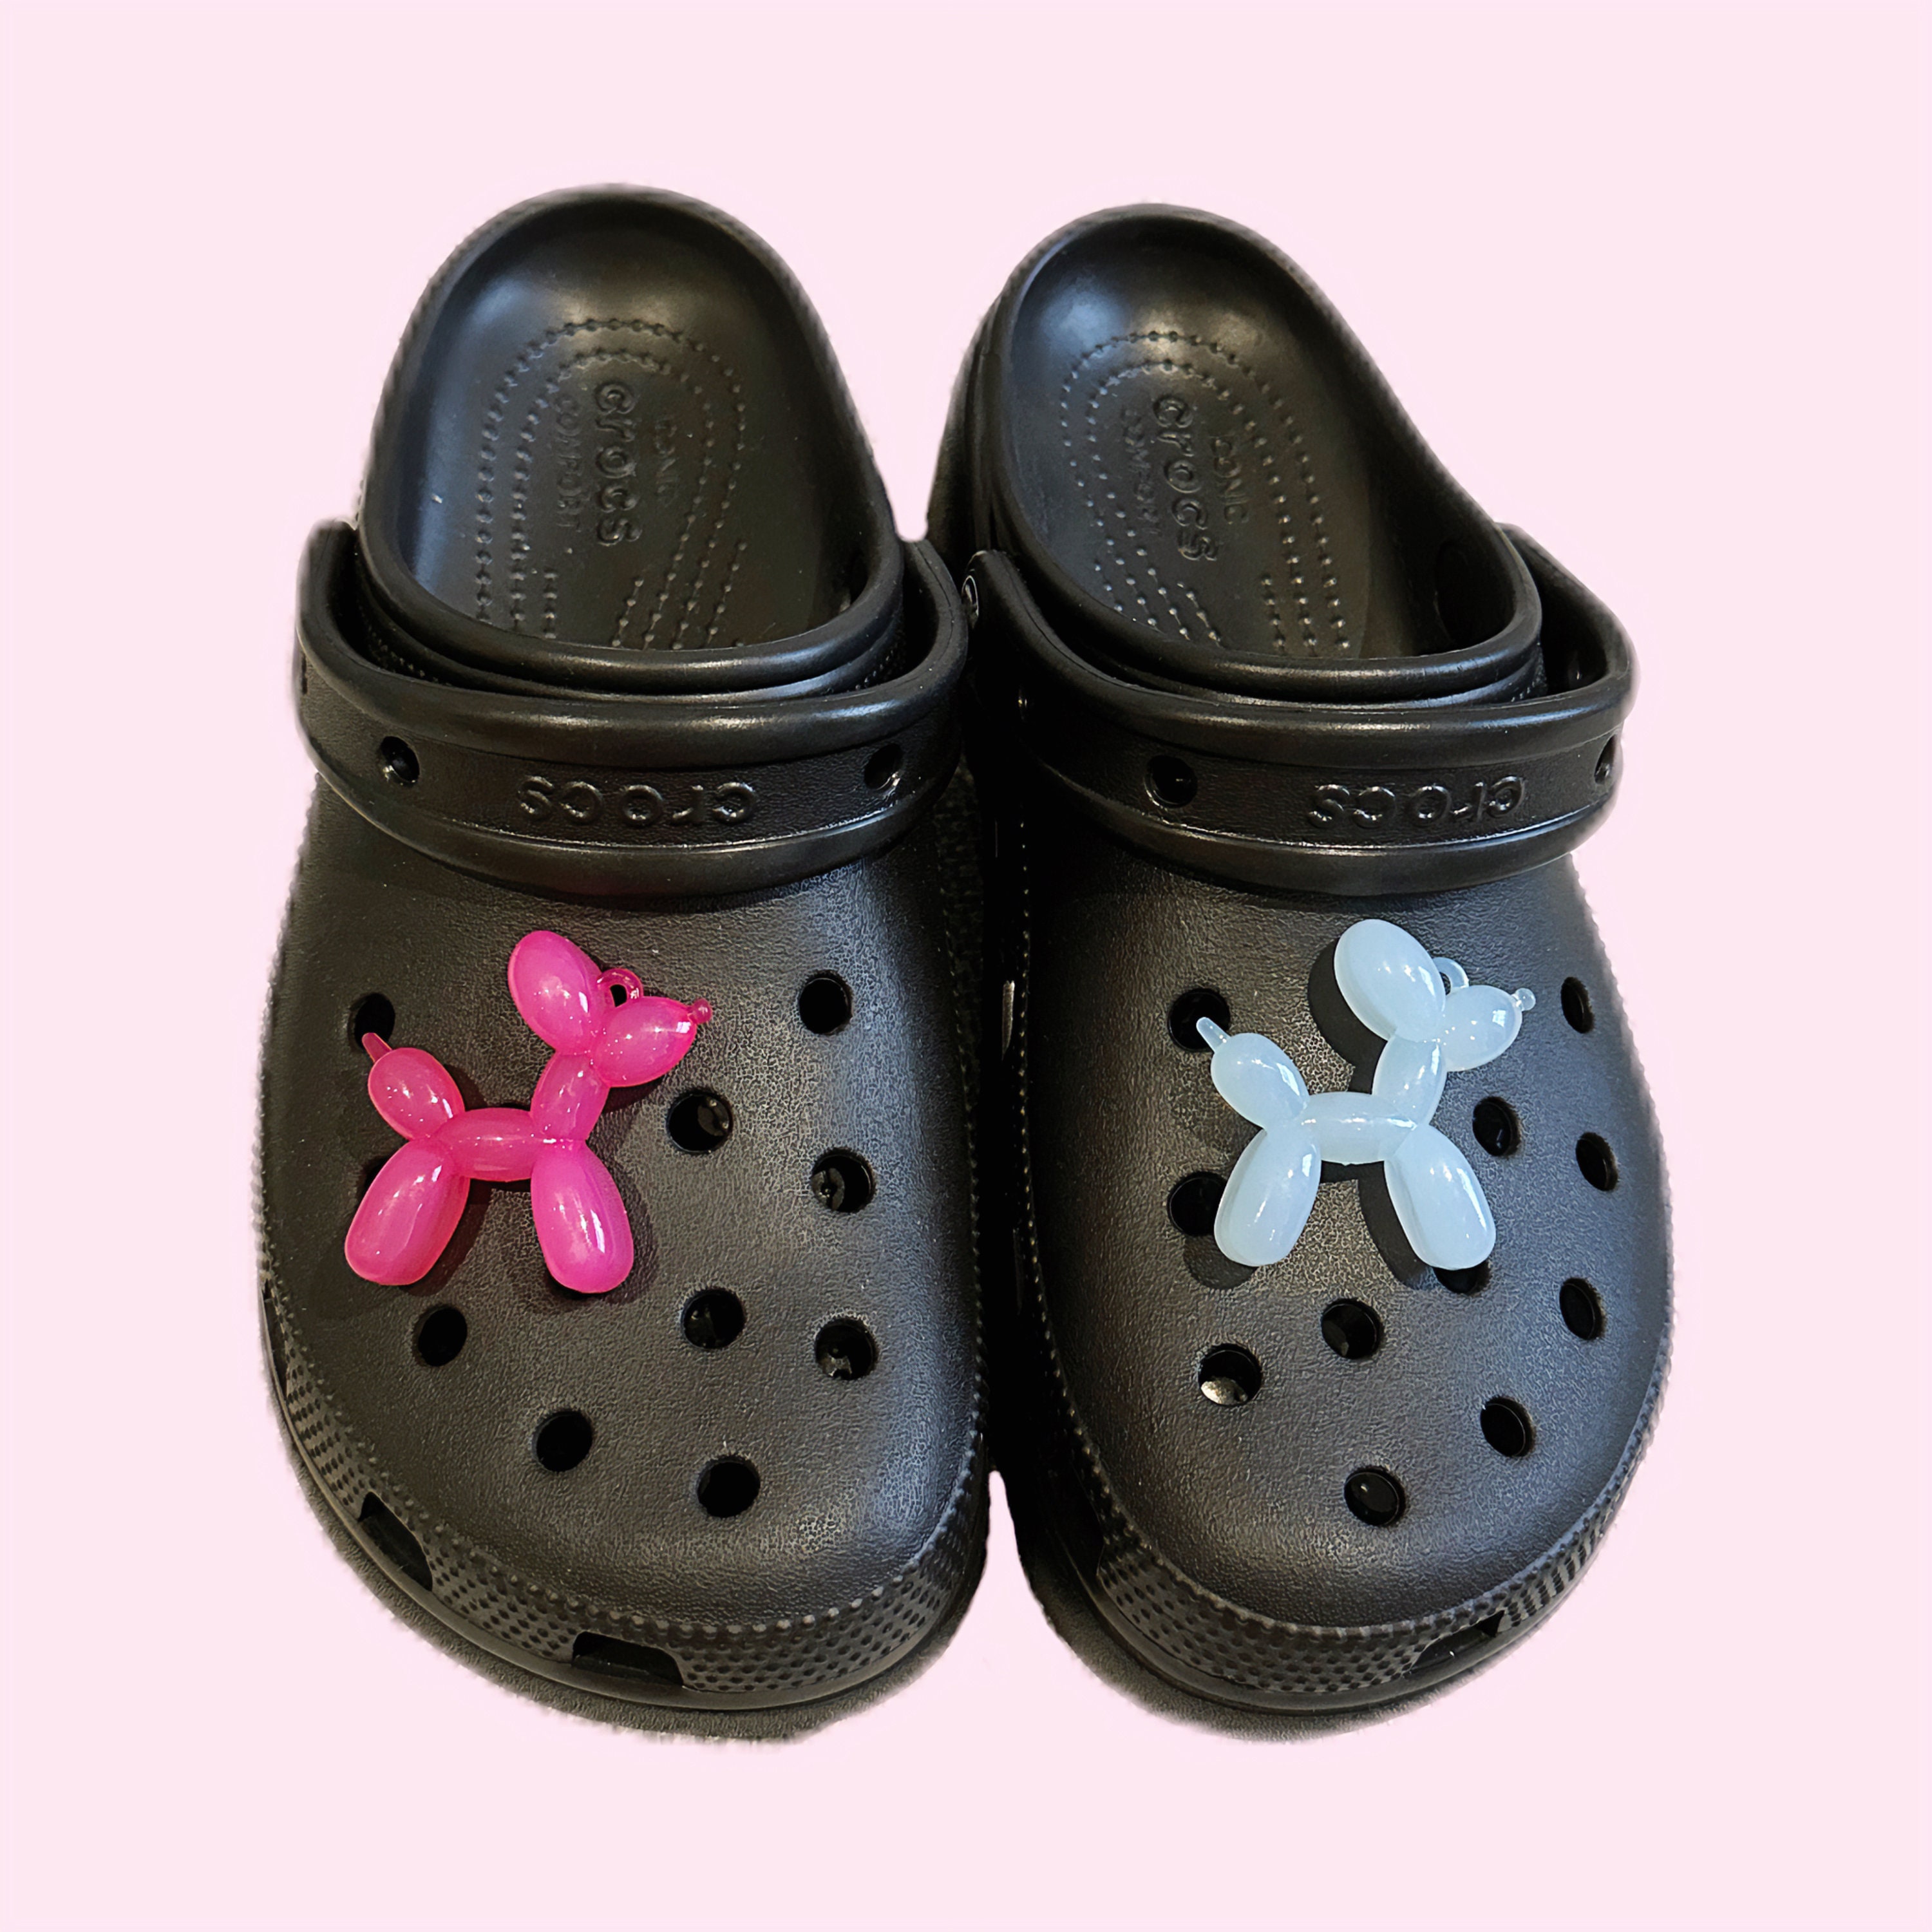 Couture Kings - 😍 Fashion and Designer Croc Shoe Charms 😍 by Couture  Kings starting at $2.50 Croc charms of all your favorite designers. You  need these Croc charms now to dress